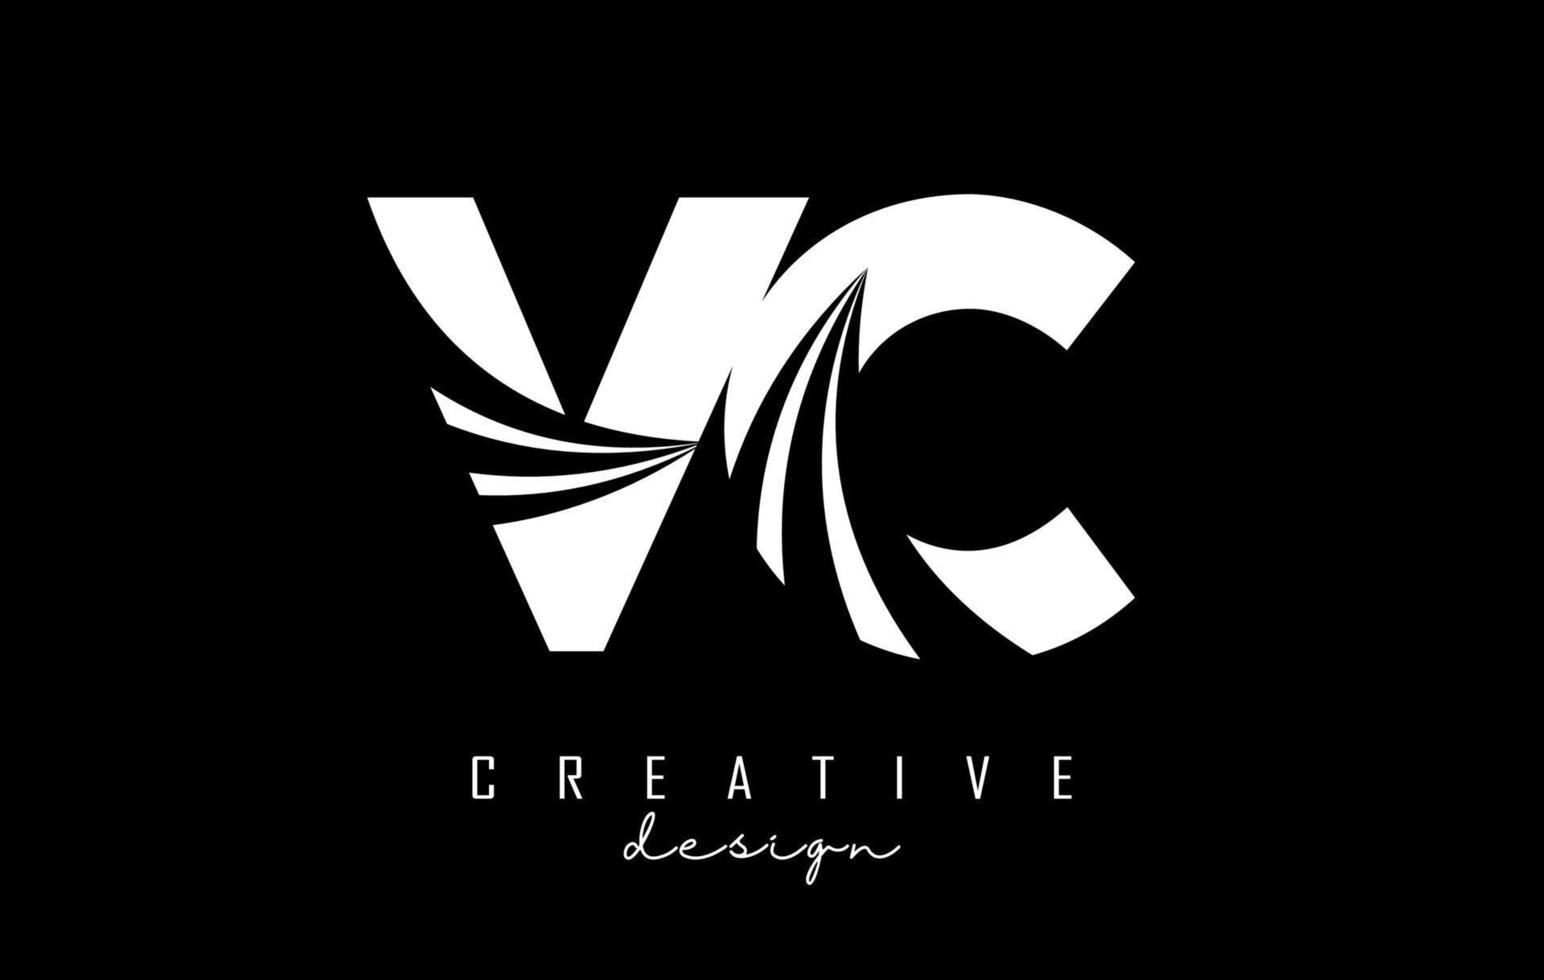 Creative white letters VC v c logo with leading lines and road concept design. Letters with geometric design. vector